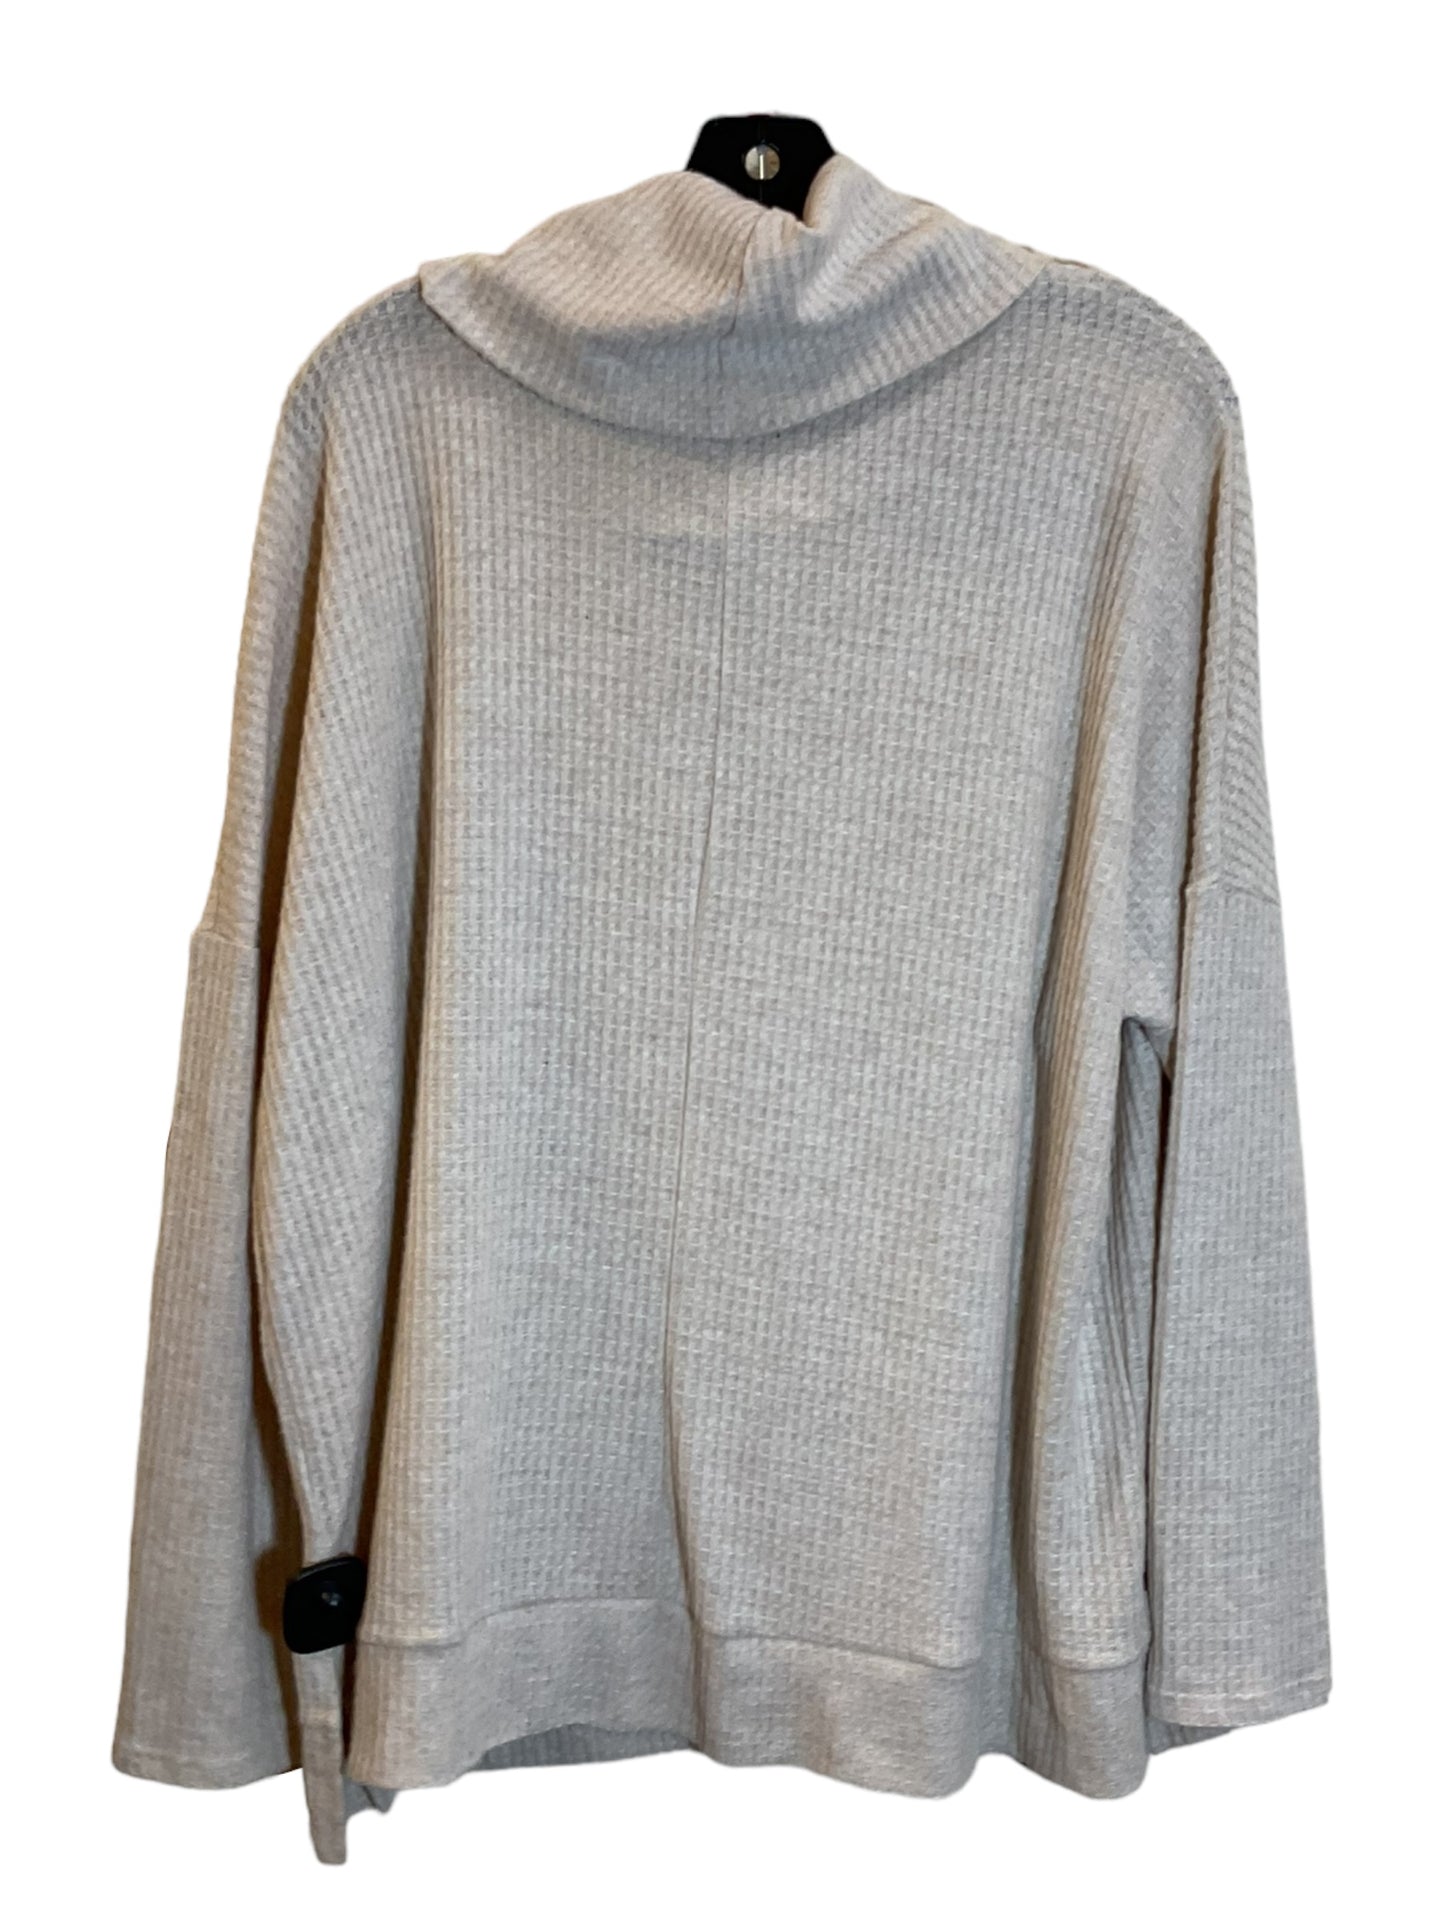 Sweater By Entro  Size: L